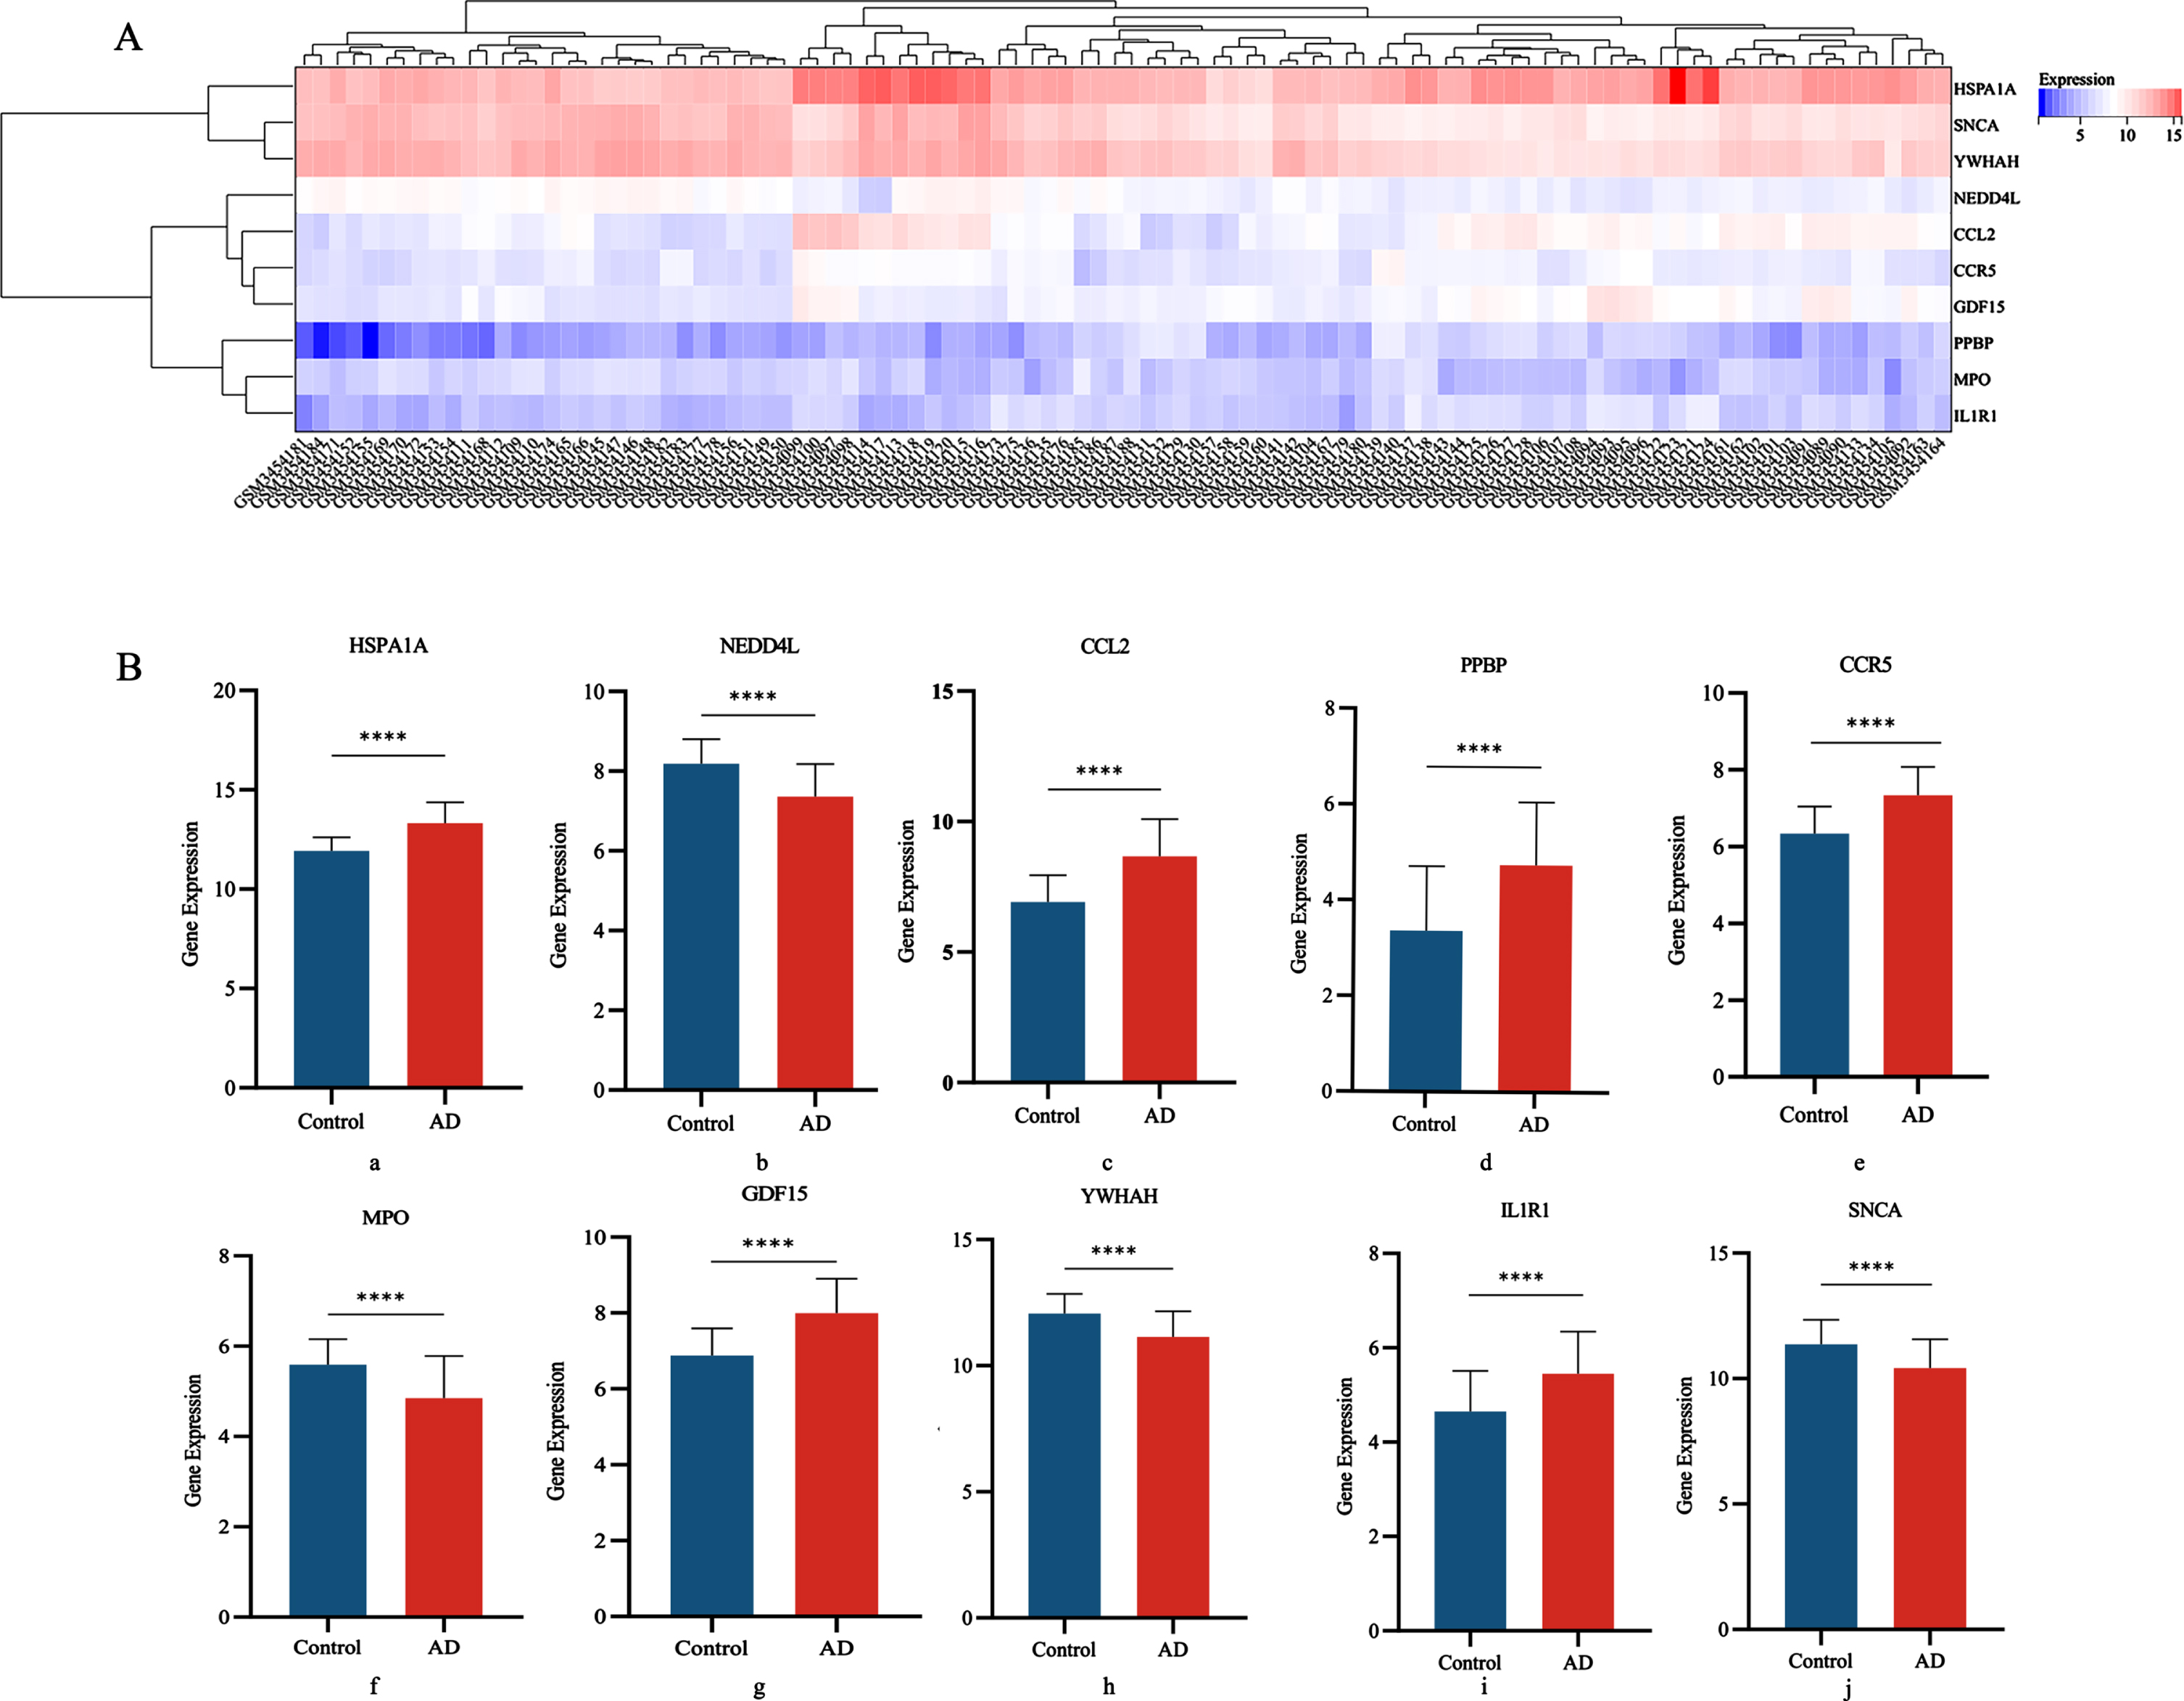 A) Heat map of DGEs expression; B) Differential expression of 10 central genes in AD group and Control groups (a: HSPA1A; b: NEDD4L; c: CCL2; d: PPBP; e: CCR5; f: MPO; g: GDF15; h: YWHAH; i: IL1R1; j: SNCA).